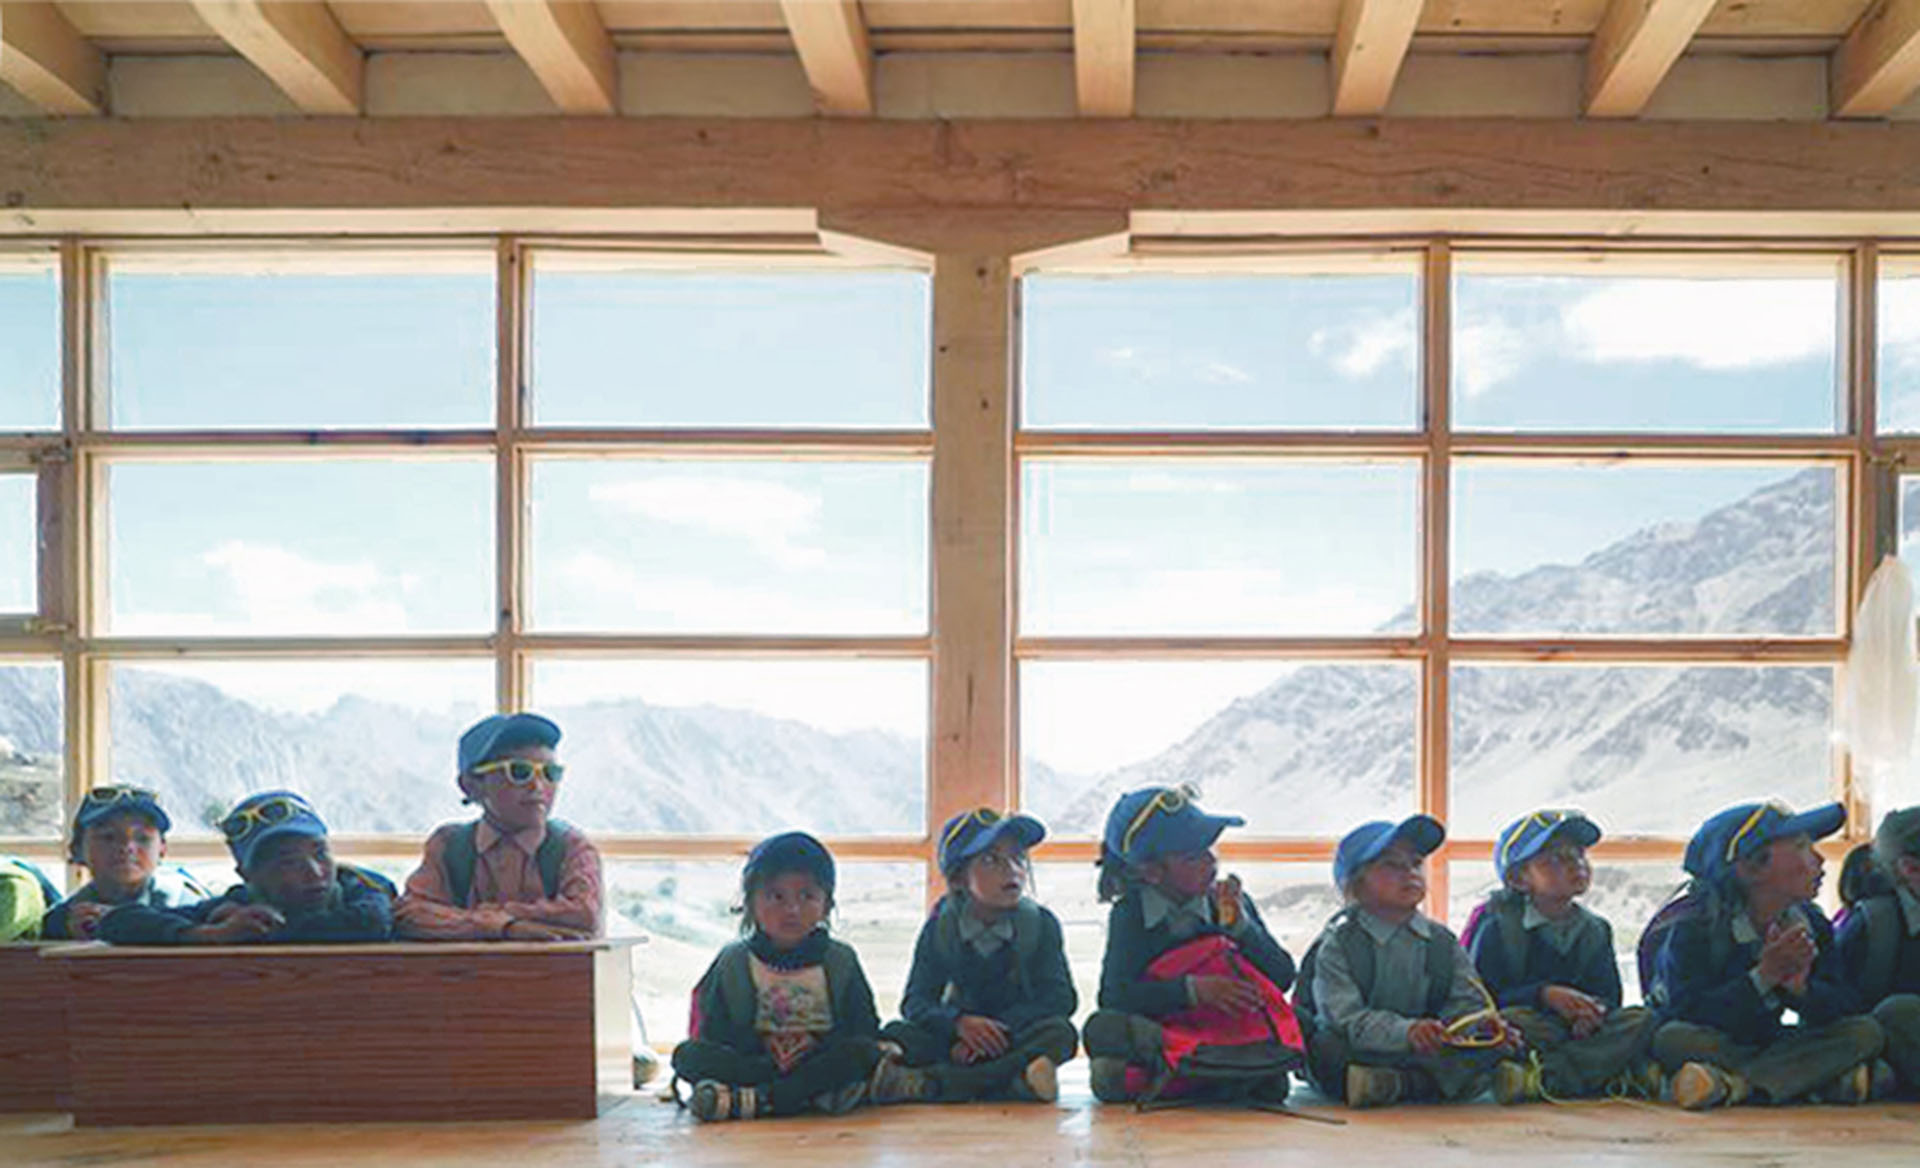 <p>The new classroom for 25-30 children allows school to be held during the harsh winter months and is located on an upper embankment of the river, safe from flooding.</p>